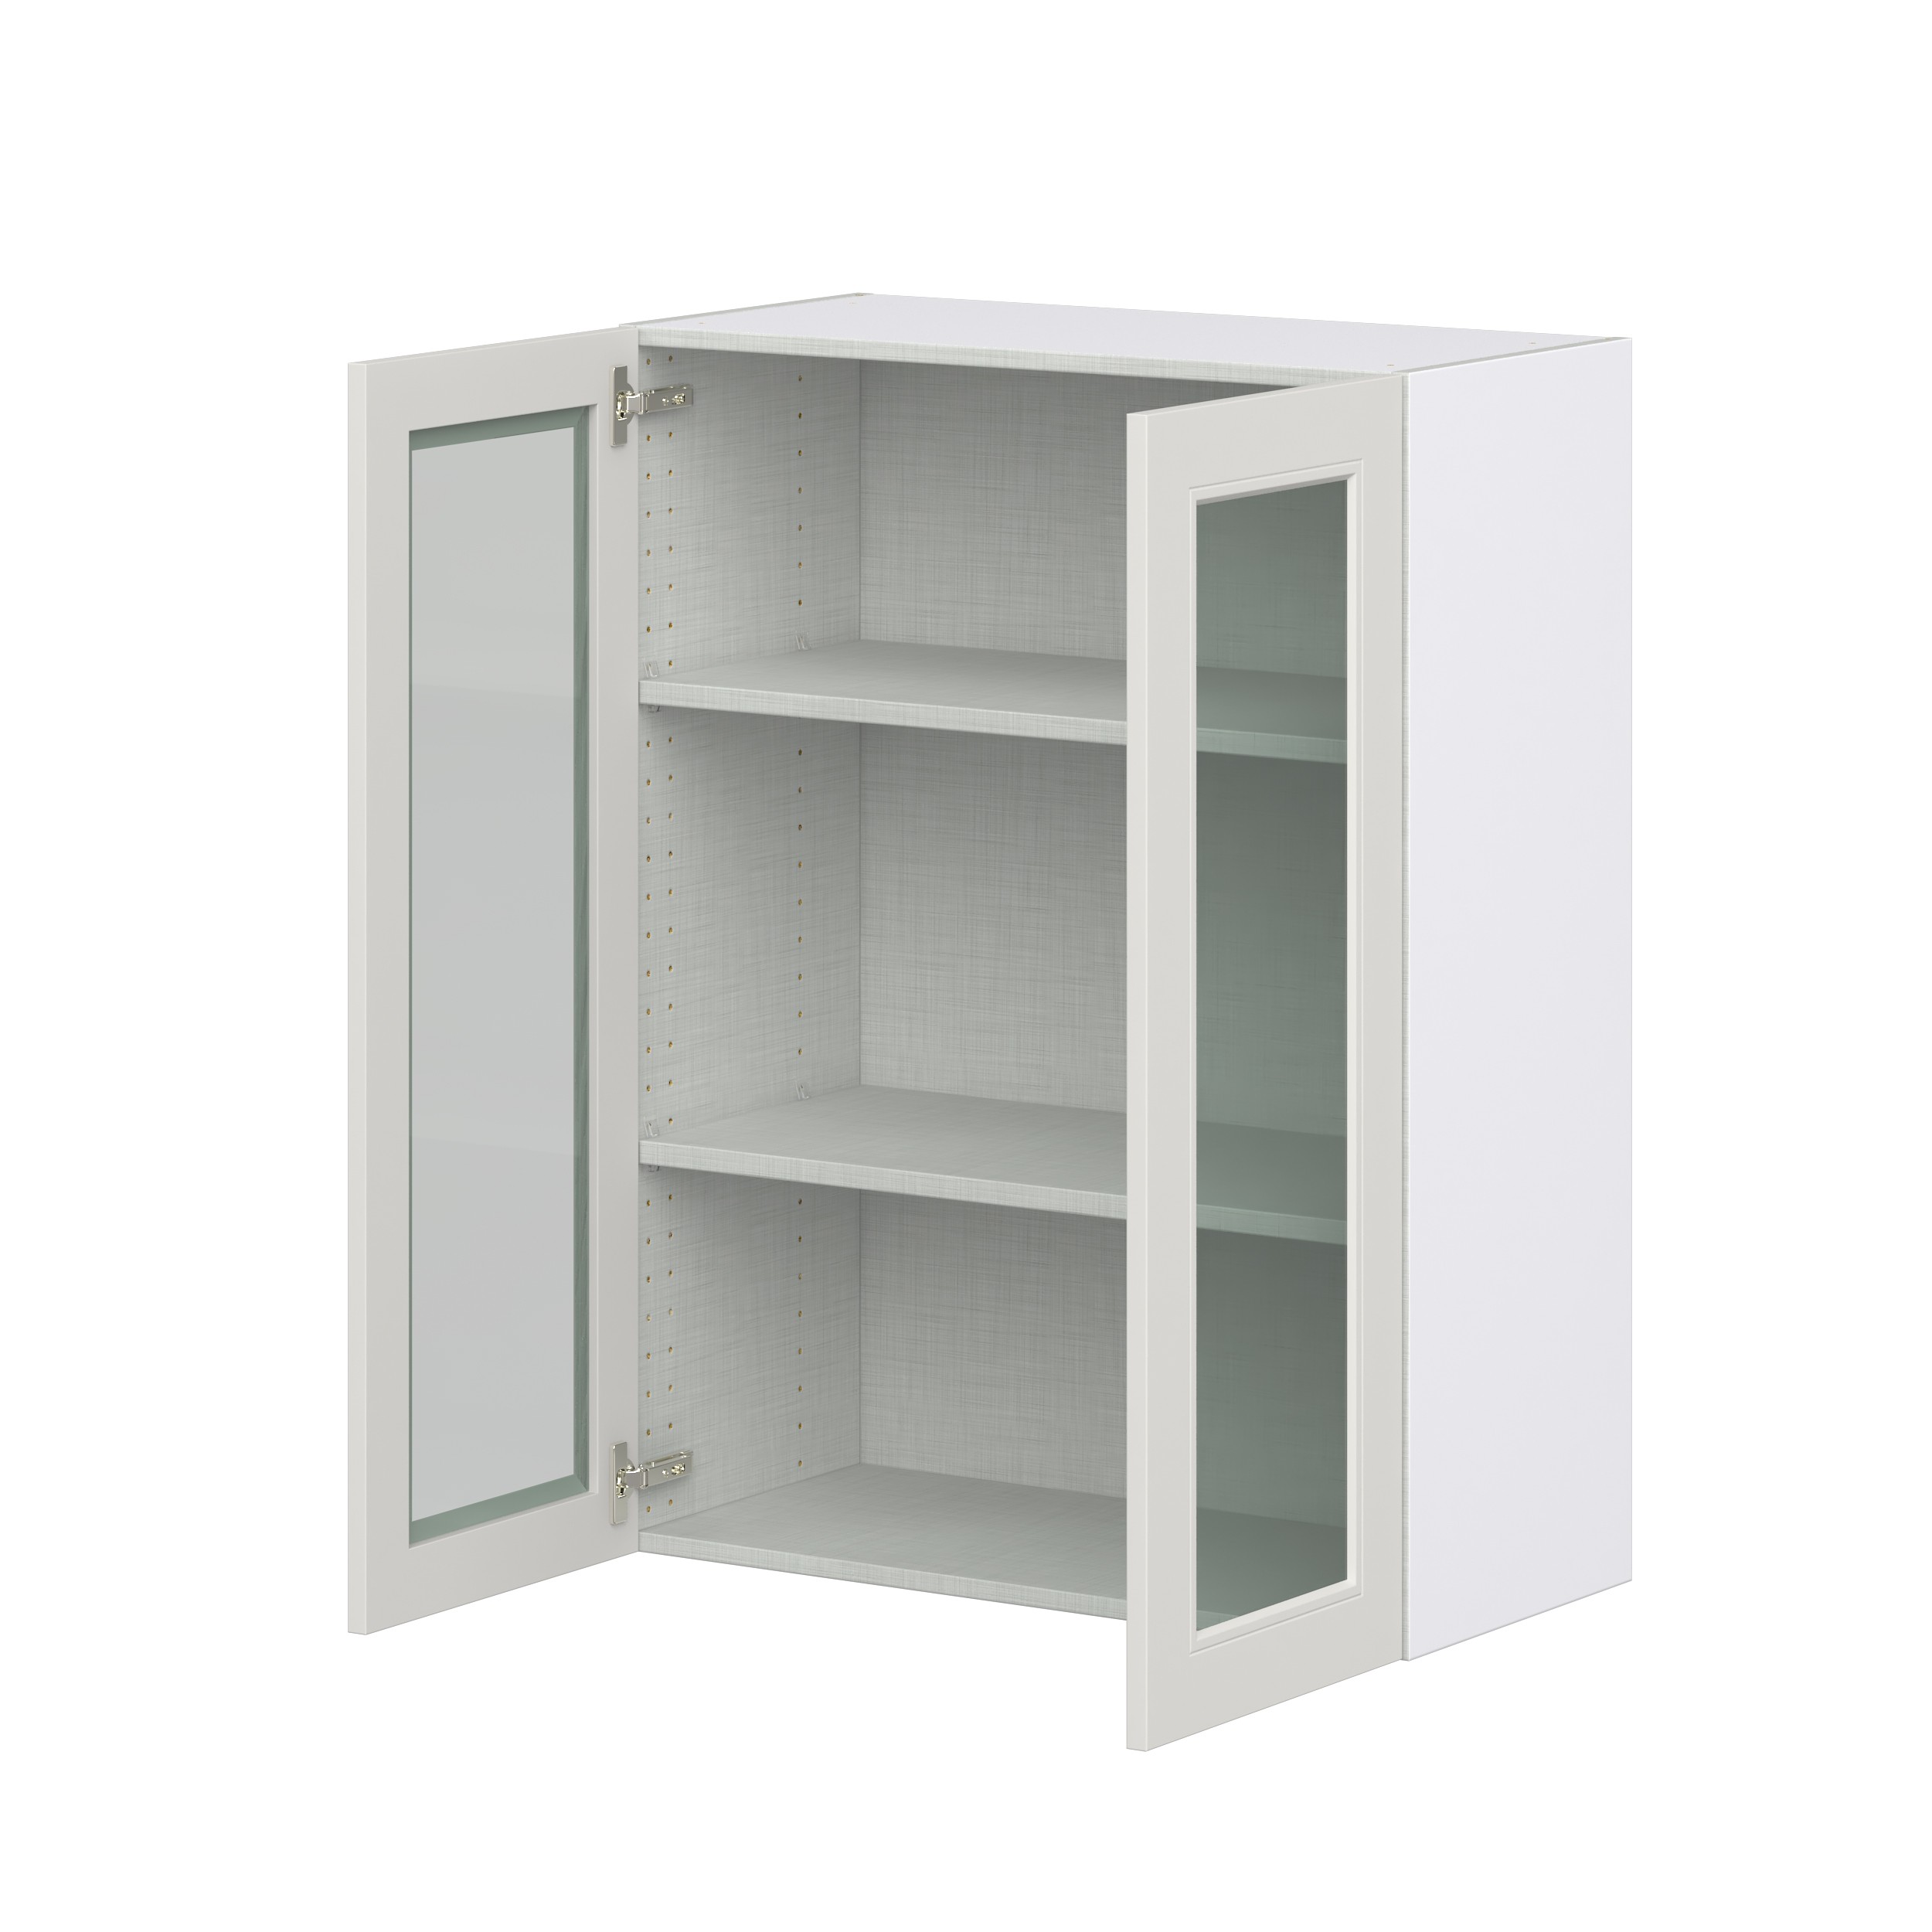 Wisteria Painted Light Gray Recessed Assembled Wall Cabinet with 2 Glass Door (30 in. W x 40 in. H x 14 in. D)